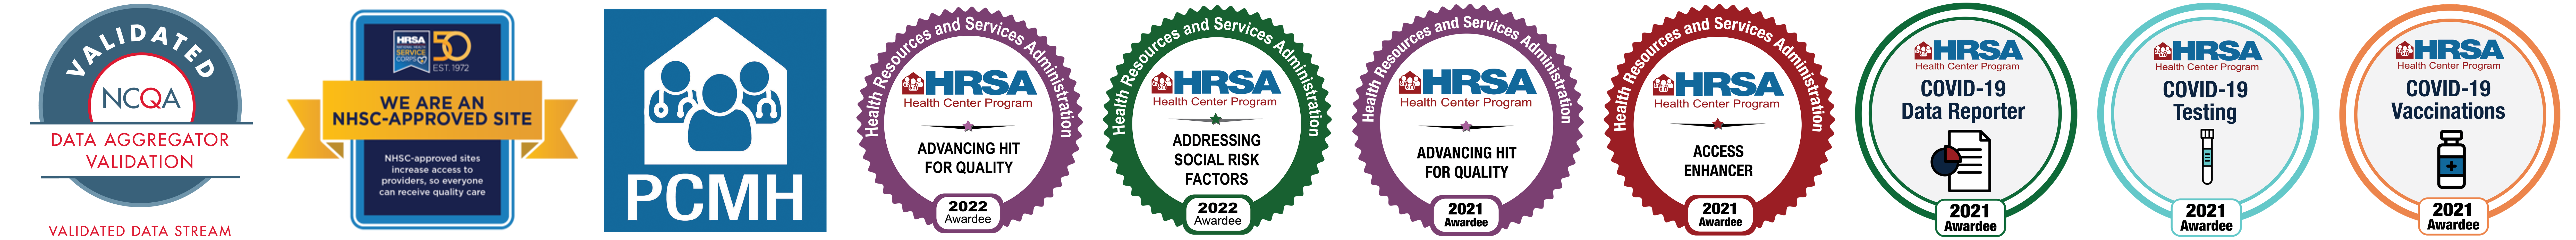 Row of HRSA and PCMH badges